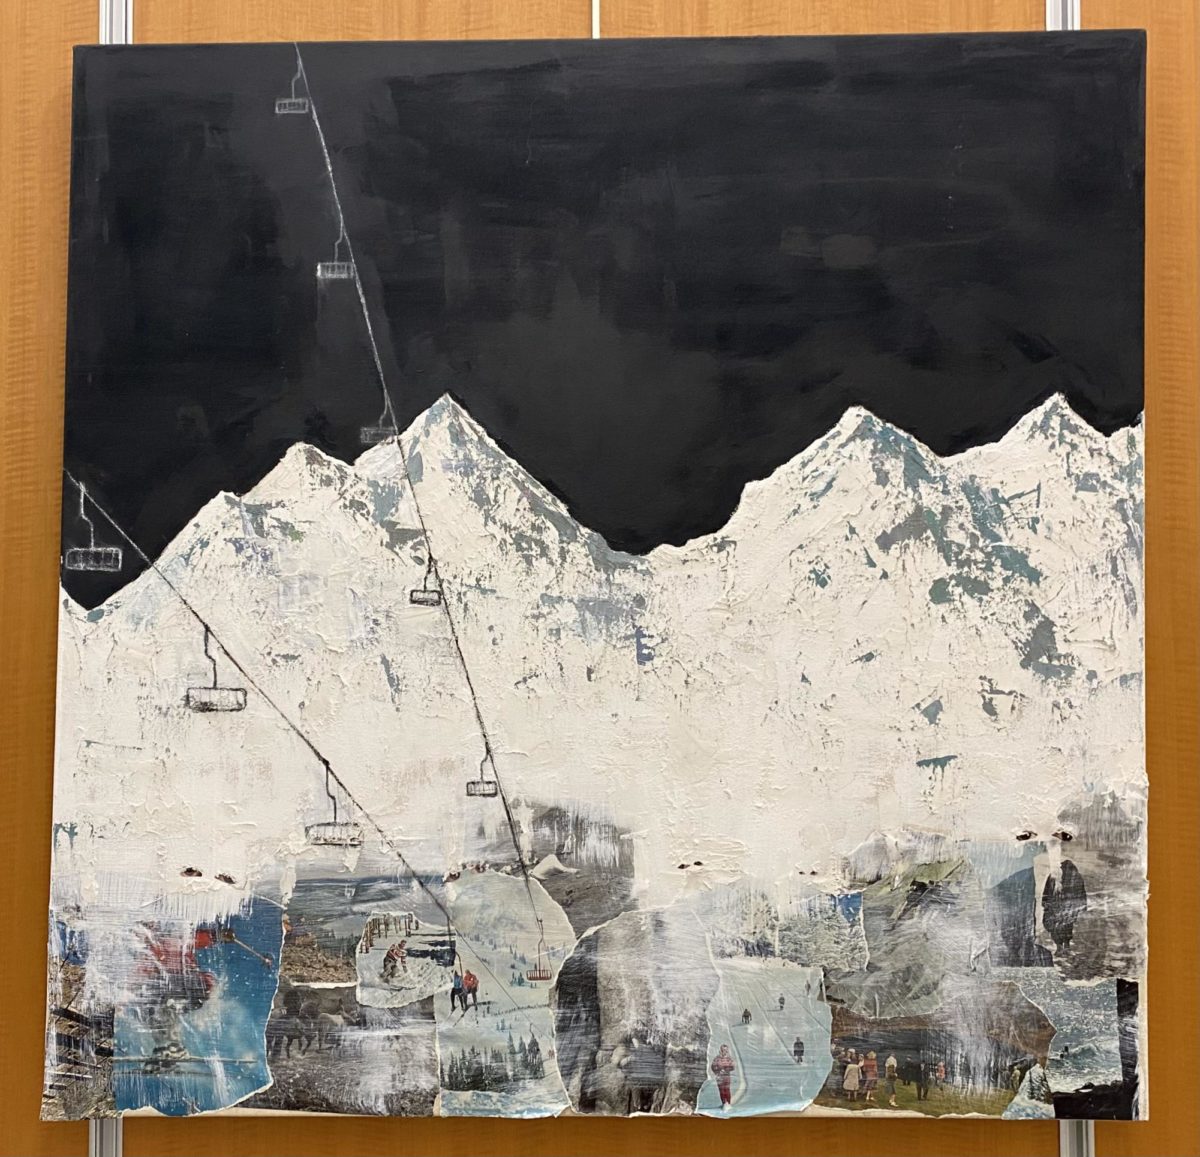 Ellie McCollums painting (pictured) is one of the many art pieces displayed in the college counseling space.

Credit: Cate Reames
